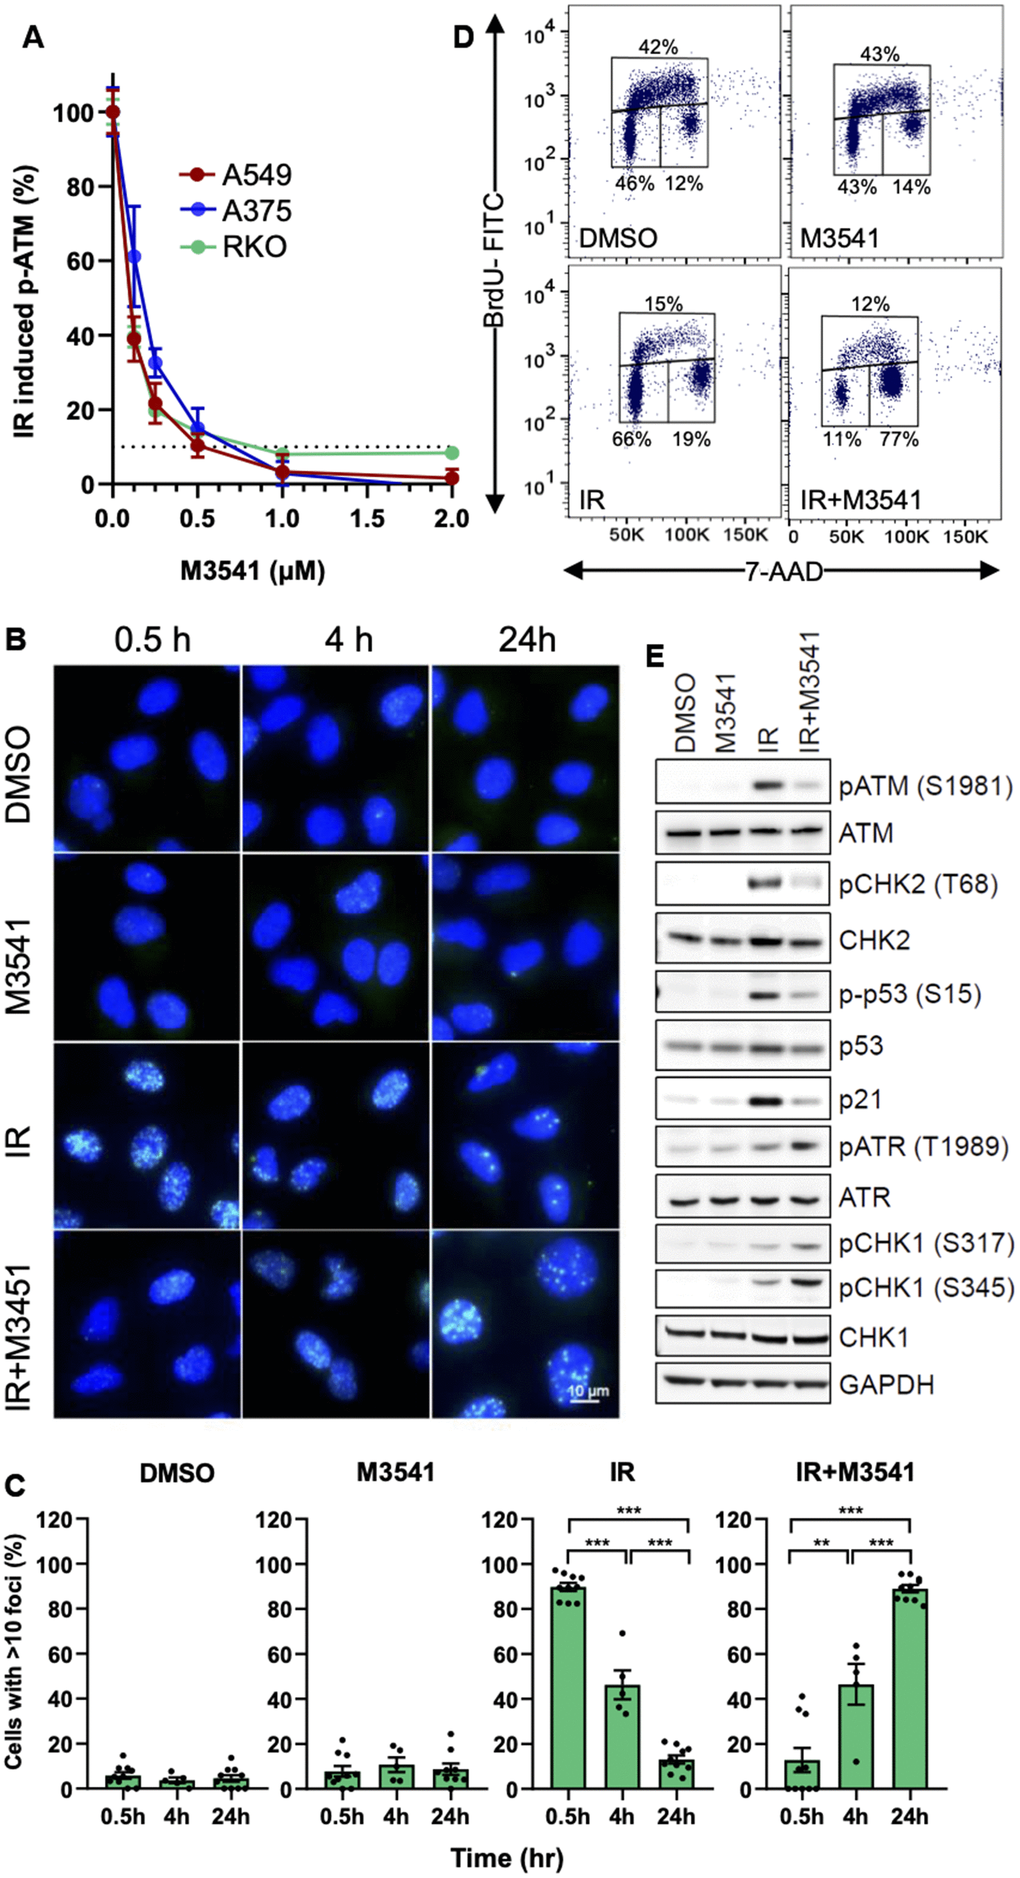 M3541 suppresses DNA DSB repair and modulates cellular response to radiation. (A). Dose-dependent inhibition of ATM autophosphorylation by M3541 in response to radiation. Proliferating A549, A375 and RKO cells were exposed to 5Gy IR to increasing concentrations of M3541 for 1 hour. Cell lysates were collected and ATM phosphorylation at serine 1981 was determined by MSD. Dashed line indicated 90% inhibition. (B) Analysis of γH2AX foci in A549 cells following exposure to DMSO, 1μM M3541, 5Gy IR, or combination of both for 0.5, 4 and 24 h by immunofluorescence. DAPI was used for nuclear counterstain and images were taken at 63x magnification. Scale bar is 10 μm. (C) Quantification of γH2AX foci was done by counting the number of cells with >10 foci in images from (C) after indicated times post radiation. (D) BrdU cell cycle analyses of A549 cells exposed to DMSO, M3541, IR or IR+M3541 for 24 h by flow cytometry. The percentage of cells in each phase was calculated and representative data are shown. (E) Western blot analysis of the effect of M3541 on IR-induced ATM and ATR signaling in A549 cell lysates prepared 6 h post IR. Representative images are shown.